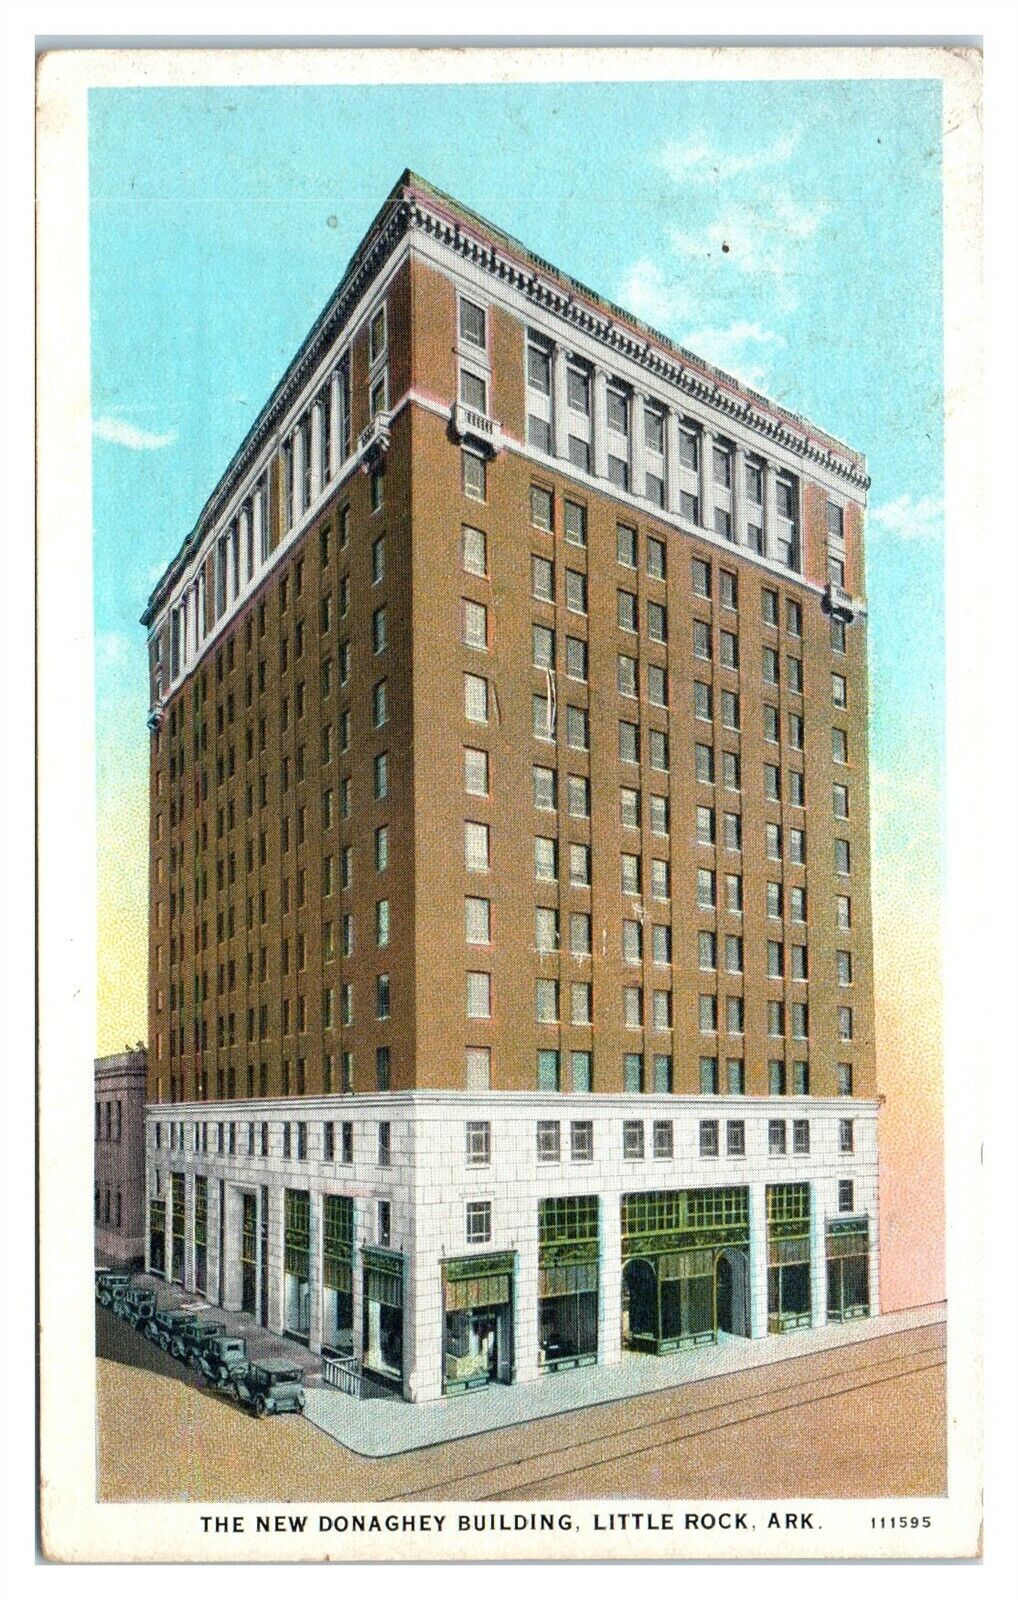 The New Donaghey Building, Little Rock, AR Postcard *6S(3)2